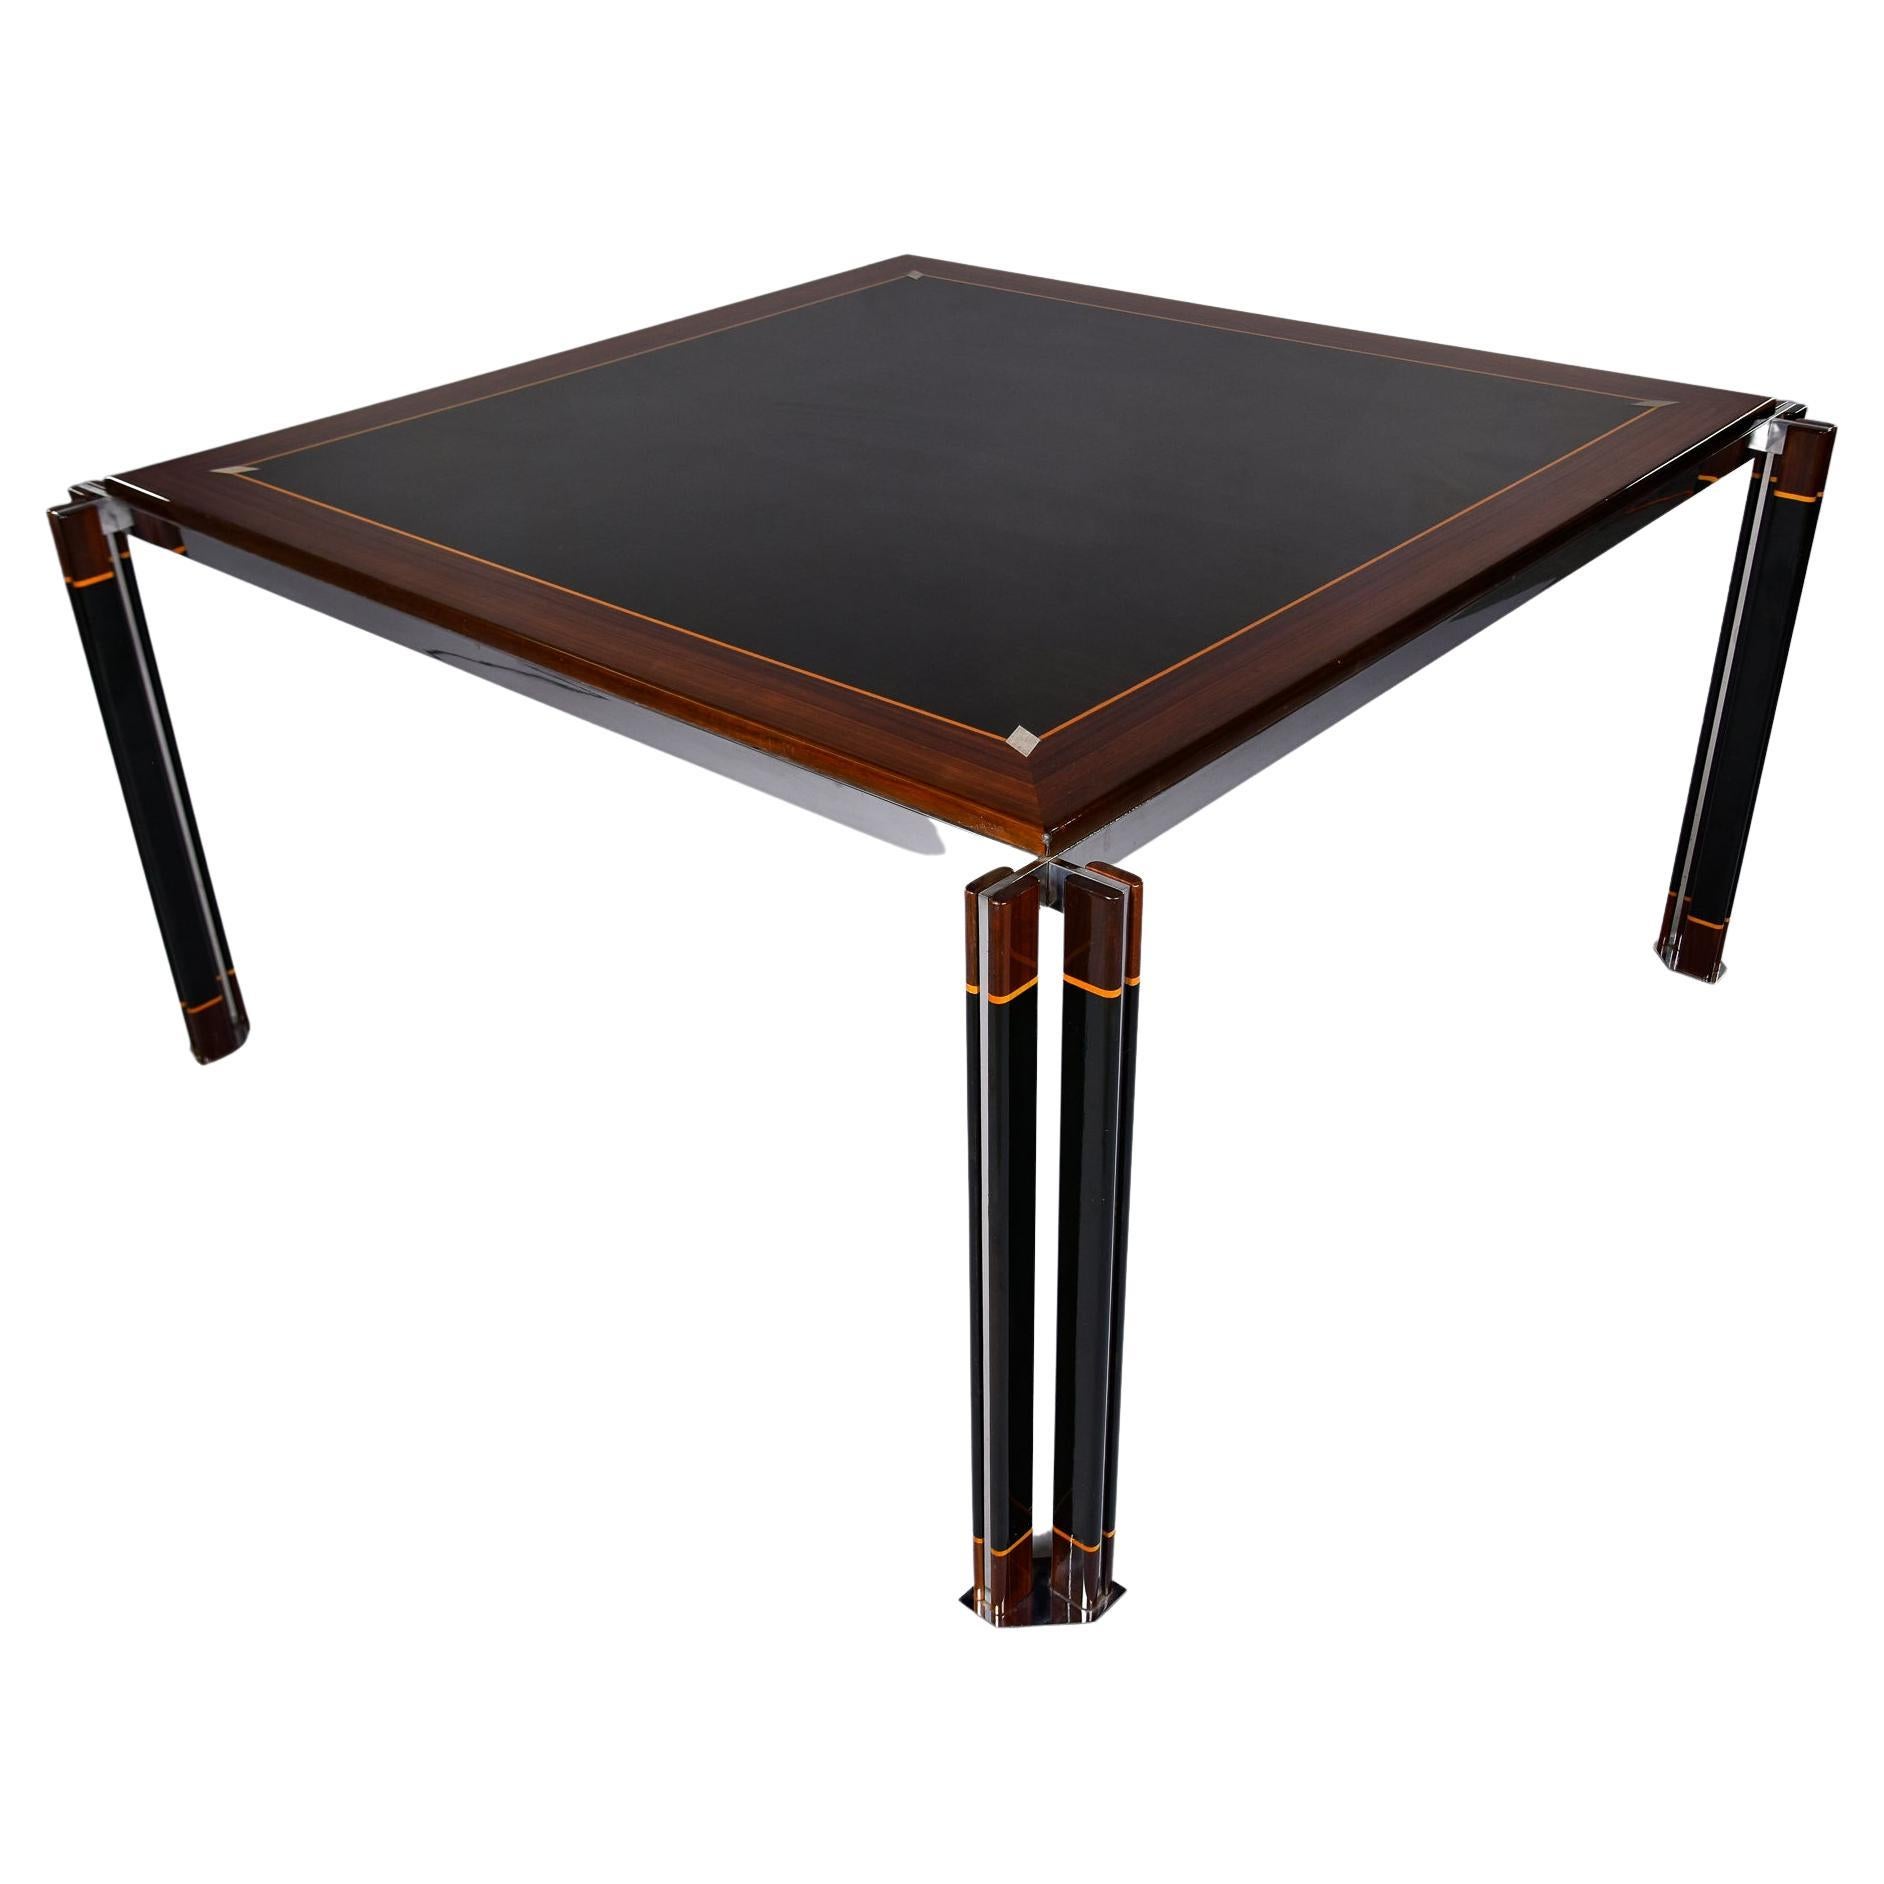 Italian Modernist Square Dining Table with Steel Detailing by Paolo Barracchia For Sale